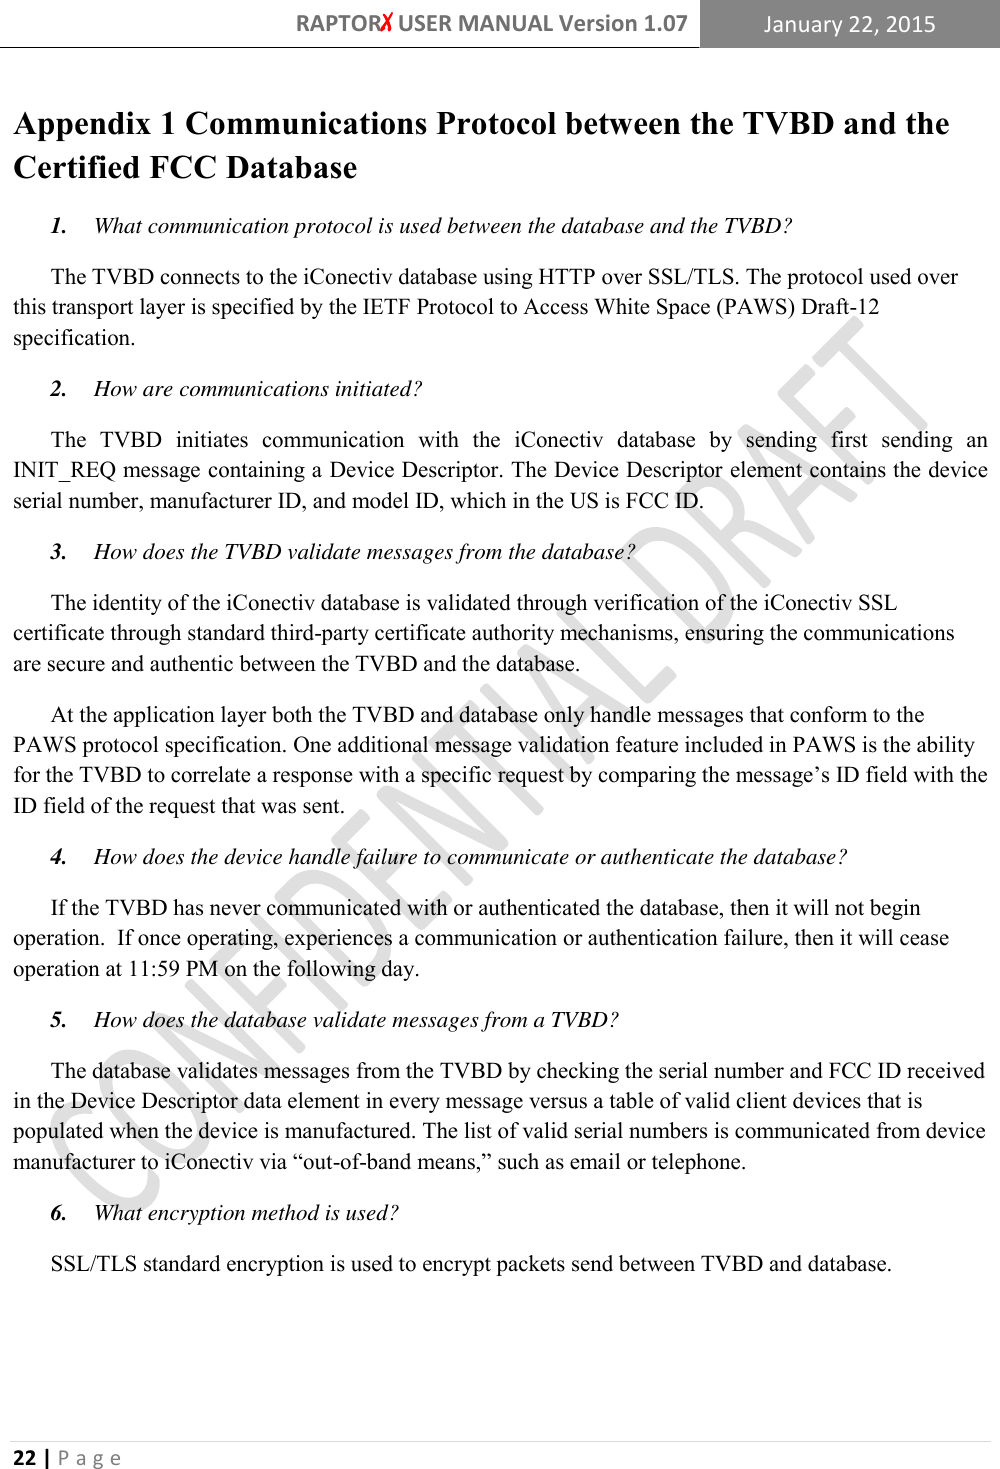 RAPTORX USER MANUAL Version 1.07 January 22, 2015  22 | P a g e   Appendix 1 Communications Protocol between the TVBD and the Certified FCC Database 1.  What communication protocol is used between the database and the TVBD?  The TVBD connects to the iConectiv database using HTTP over SSL/TLS. The protocol used over this transport layer is specified by the IETF Protocol to Access White Space (PAWS) Draft-12 specification. 2.  How are communications initiated?  The  TVBD  initiates  communication  with  the  iConectiv  database  by  sending  first  sending  an INIT_REQ message containing a Device Descriptor. The Device Descriptor element contains the device serial number, manufacturer ID, and model ID, which in the US is FCC ID. 3.  How does the TVBD validate messages from the database?  The identity of the iConectiv database is validated through verification of the iConectiv SSL certificate through standard third-party certificate authority mechanisms, ensuring the communications are secure and authentic between the TVBD and the database. At the application layer both the TVBD and database only handle messages that conform to the PAWS protocol specification. One additional message validation feature included in PAWS is the ability for the TVBD to correlate a response with a specific request by comparing the message’s ID field with the ID field of the request that was sent.  4.  How does the device handle failure to communicate or authenticate the database?  If the TVBD has never communicated with or authenticated the database, then it will not begin operation.  If once operating, experiences a communication or authentication failure, then it will cease operation at 11:59 PM on the following day.   5.  How does the database validate messages from a TVBD?  The database validates messages from the TVBD by checking the serial number and FCC ID received in the Device Descriptor data element in every message versus a table of valid client devices that is populated when the device is manufactured. The list of valid serial numbers is communicated from device manufacturer to iConectiv via “out-of-band means,” such as email or telephone. 6.  What encryption method is used?  SSL/TLS standard encryption is used to encrypt packets send between TVBD and database.    